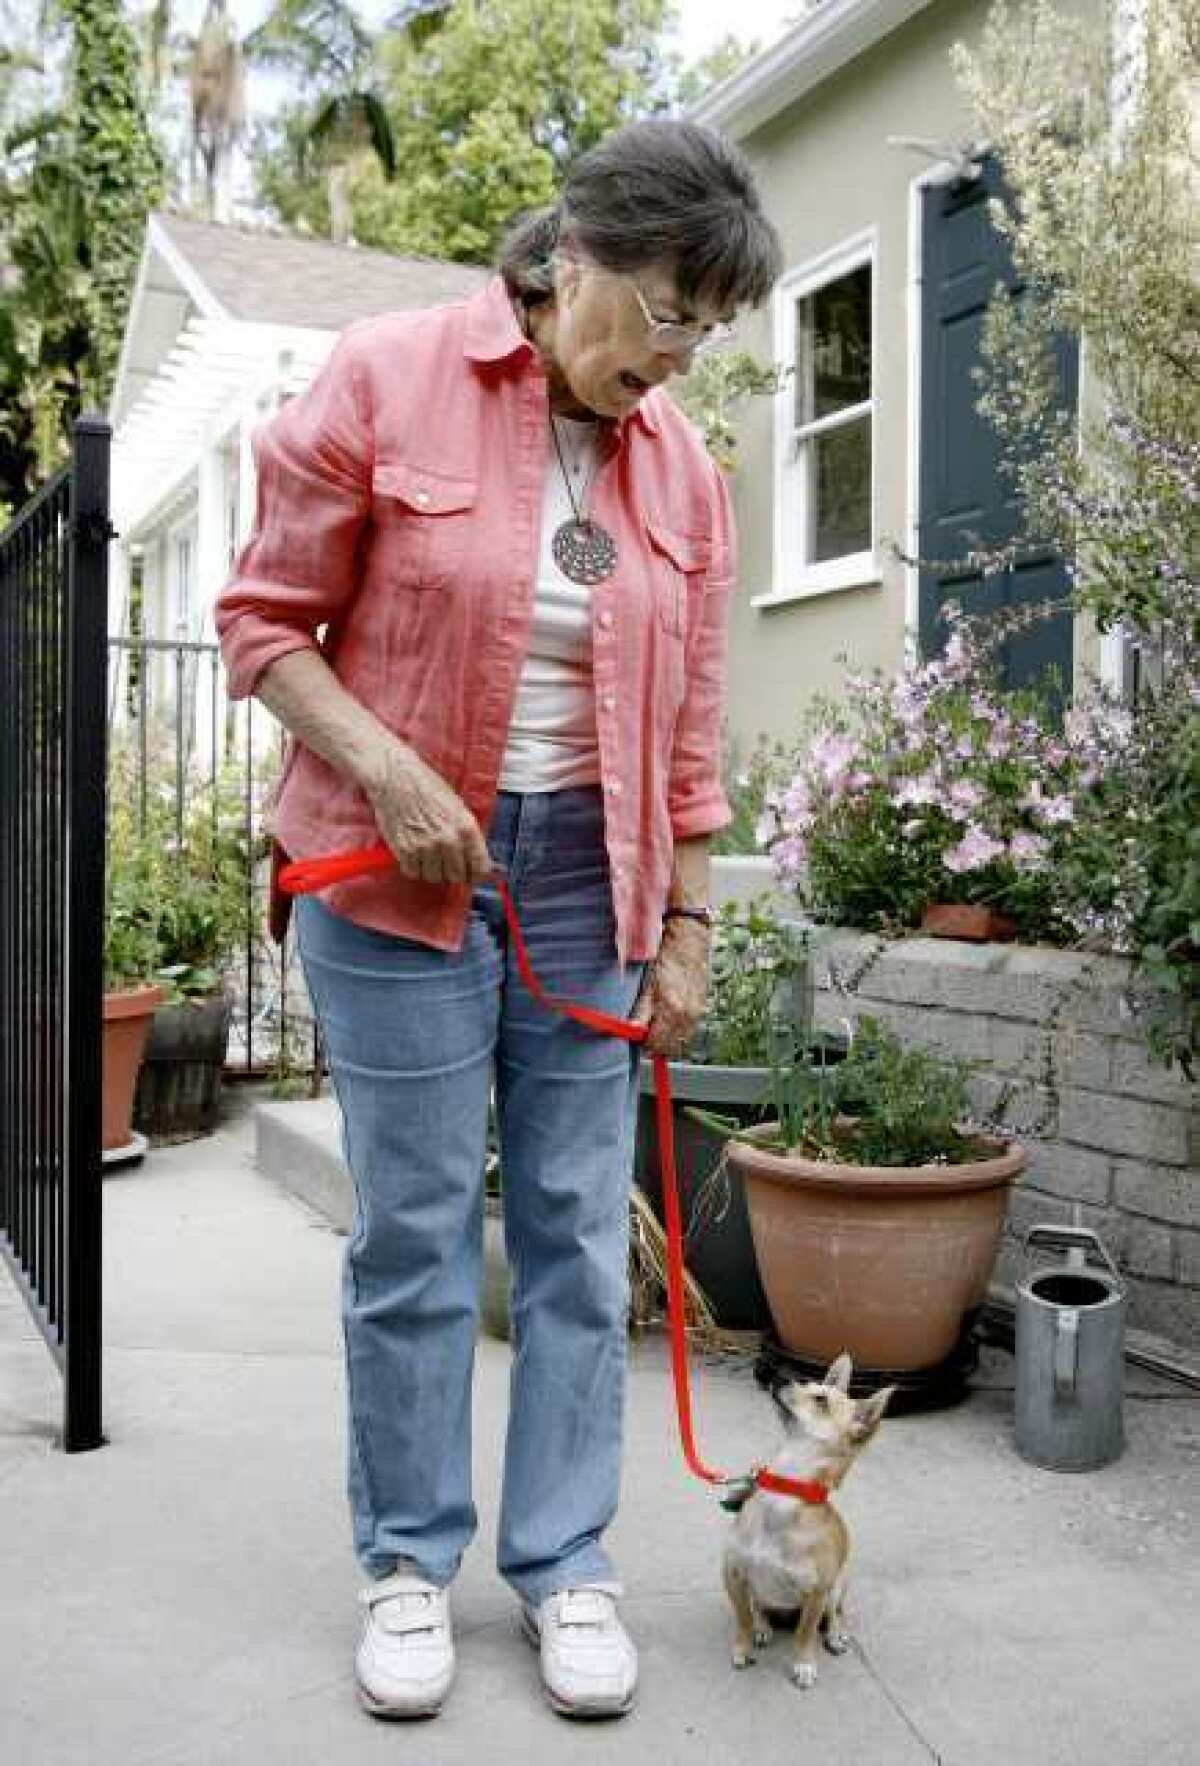 Judy Springborn works with Apple Pie, a Chihuahua mix, at her Glendale home. Springborn is hearing-impaired and the small dog assists her with daily activities around the home.